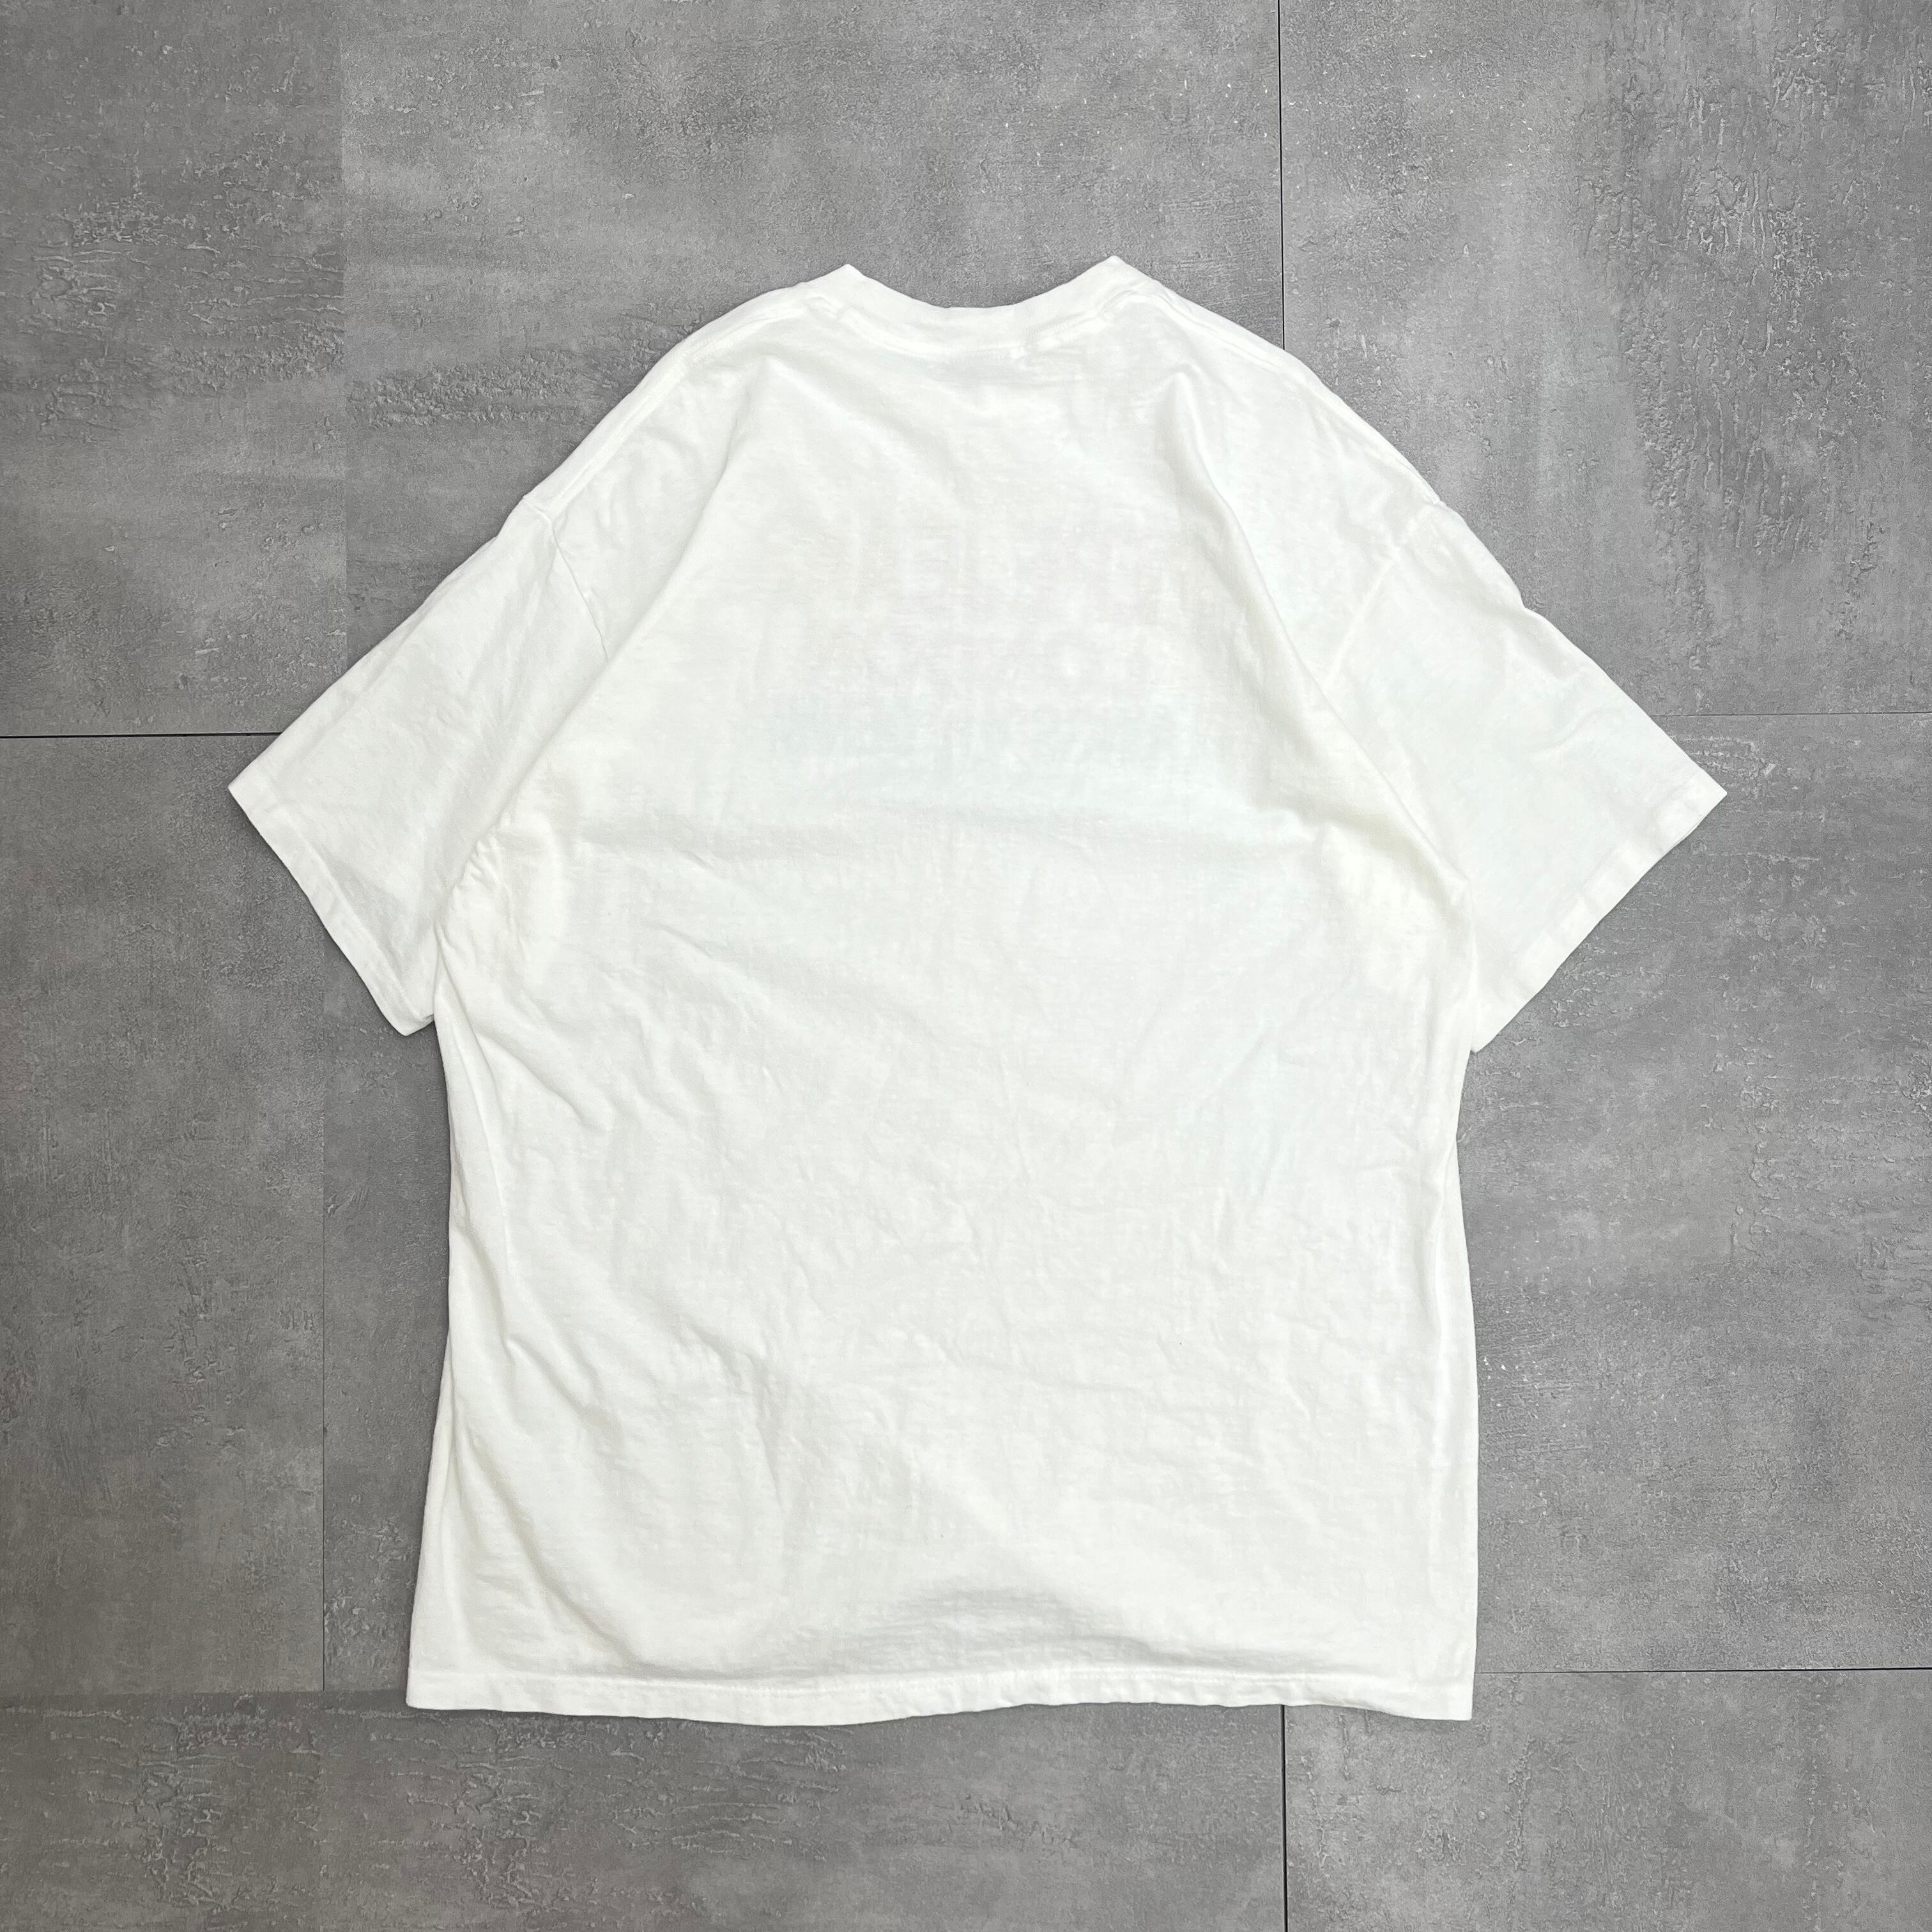 90s Prong Cleansing Tシャツ シングルステッチ ヴィンテージ